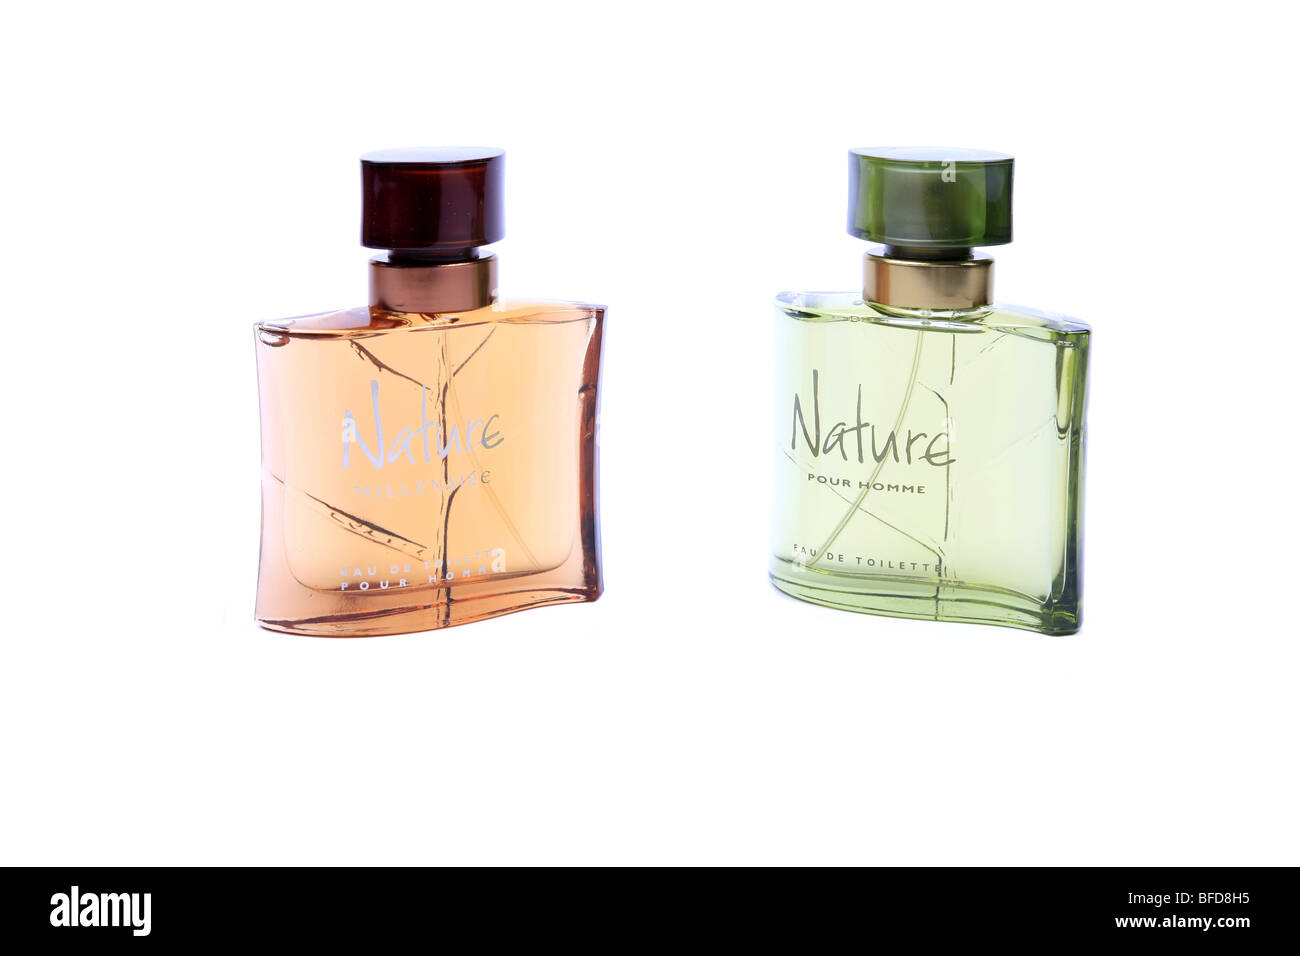 French Aftershave Lotion bottles against a white background Stock Photo